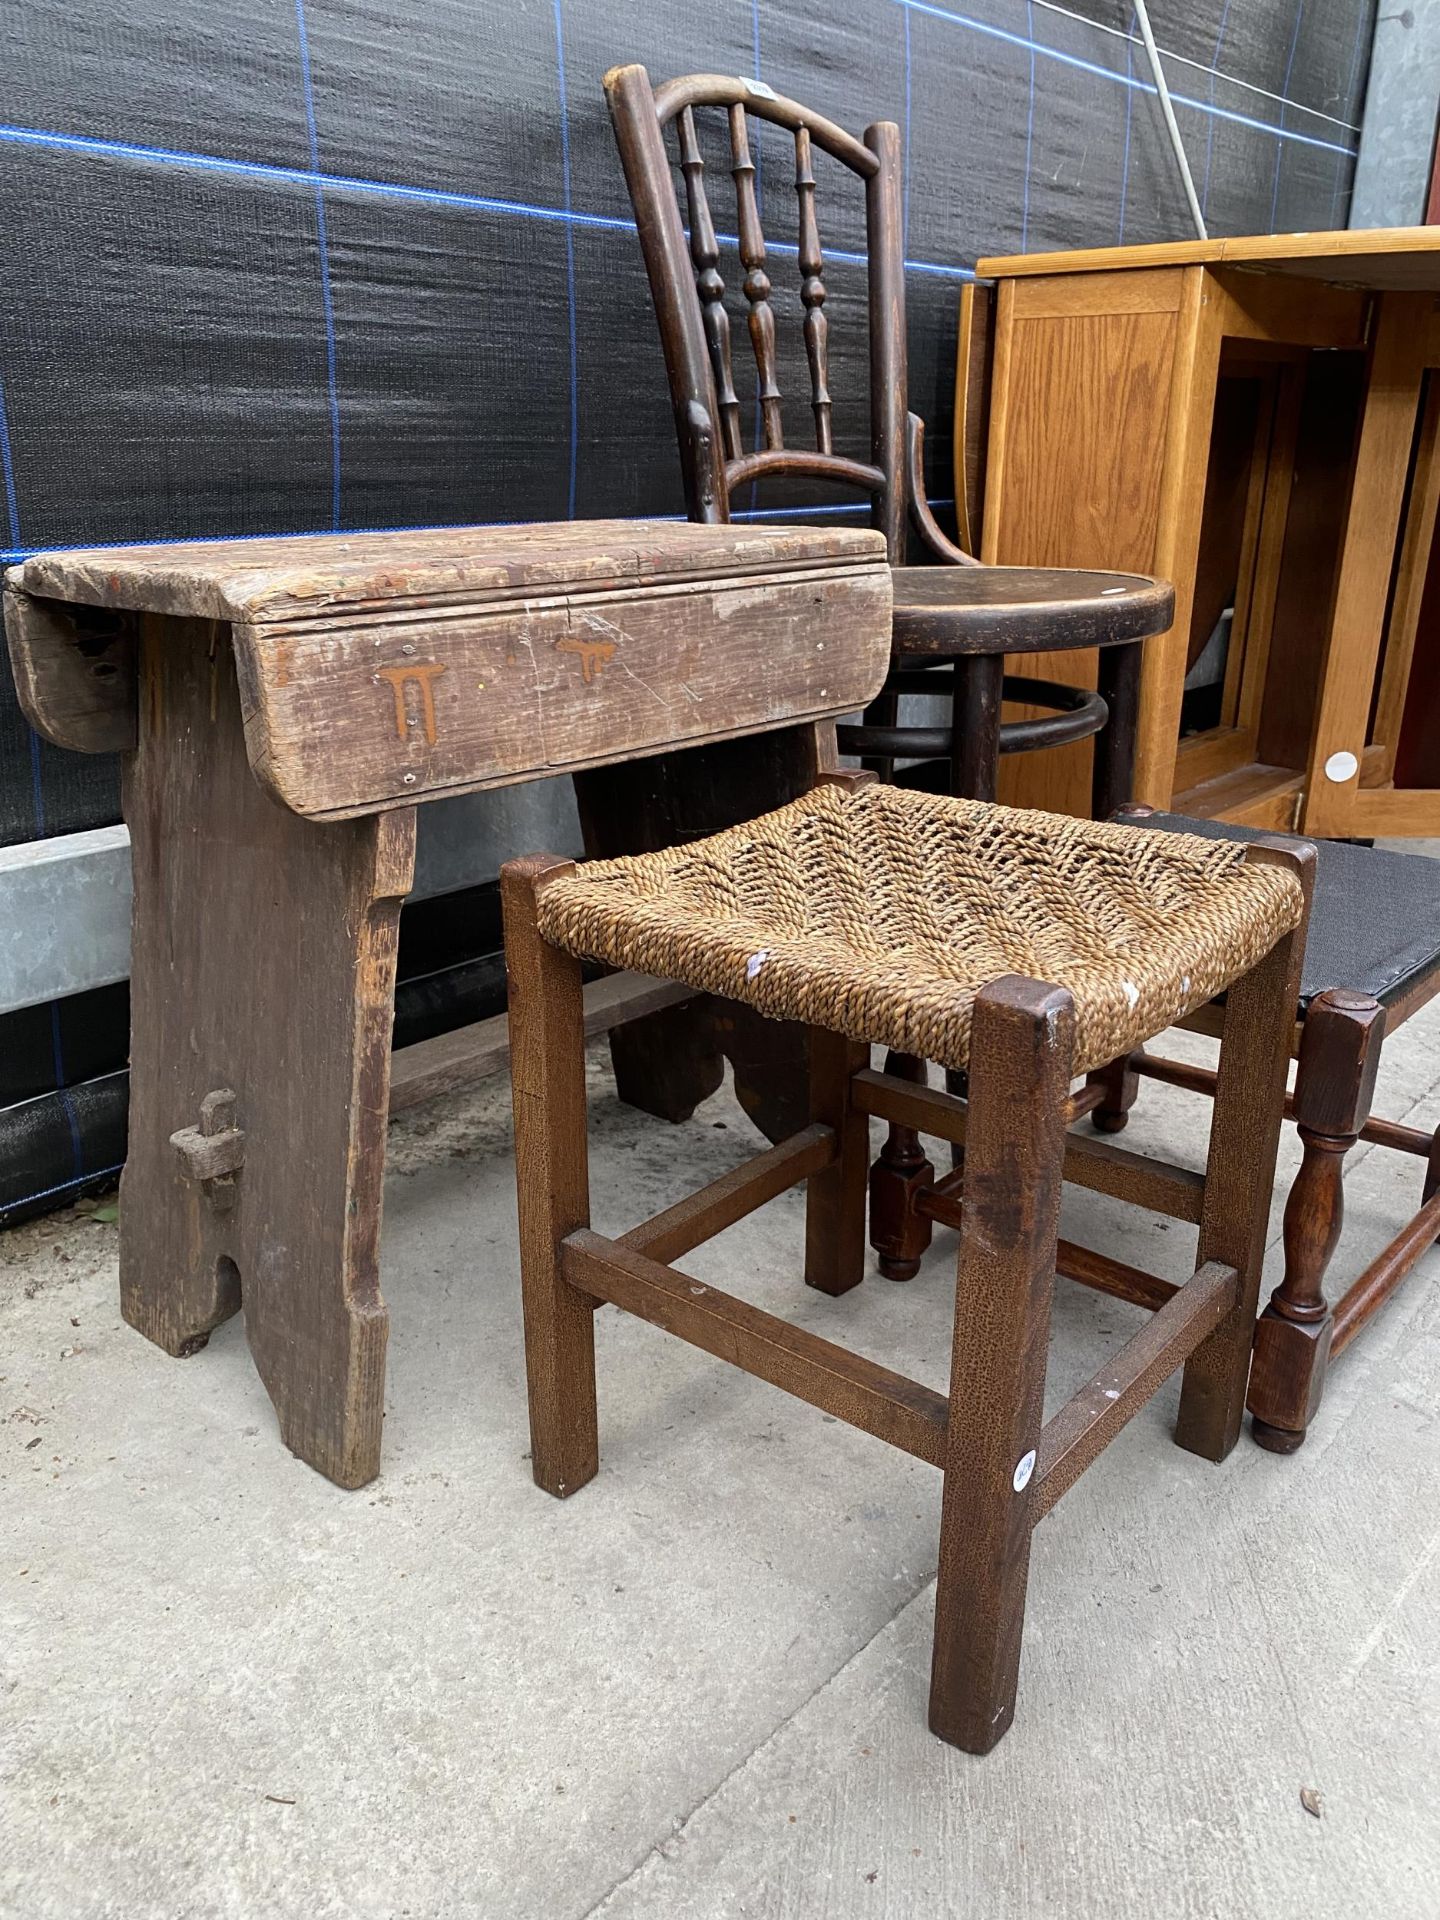 A BENTWOOD CHAIR, PINE STOOL AND TWO OTHER STOOLS - Image 2 of 3